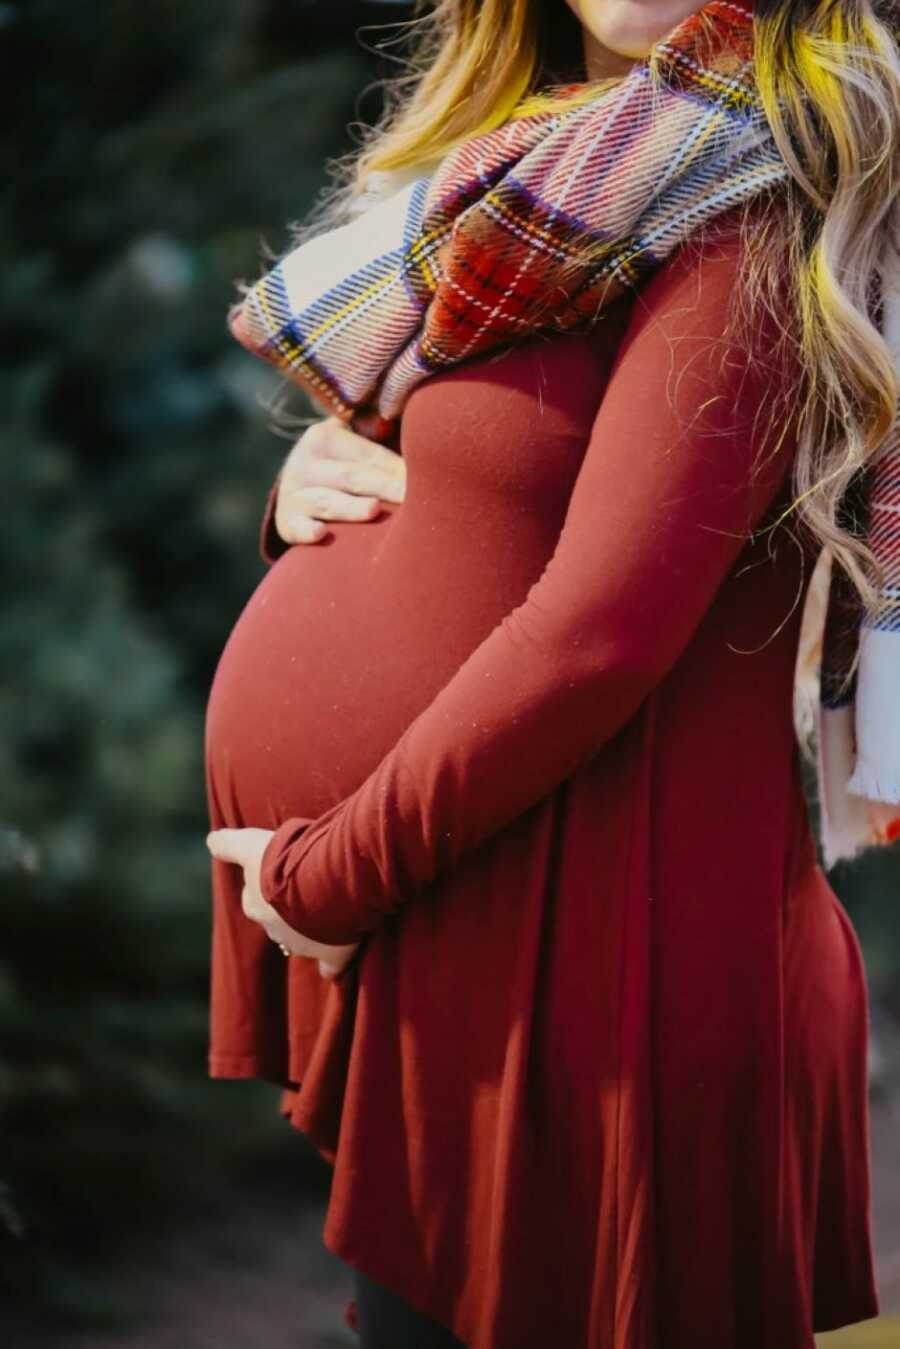 Very pregnant woman holds her baby bump while wearing a long-sleeved red dress and scarf